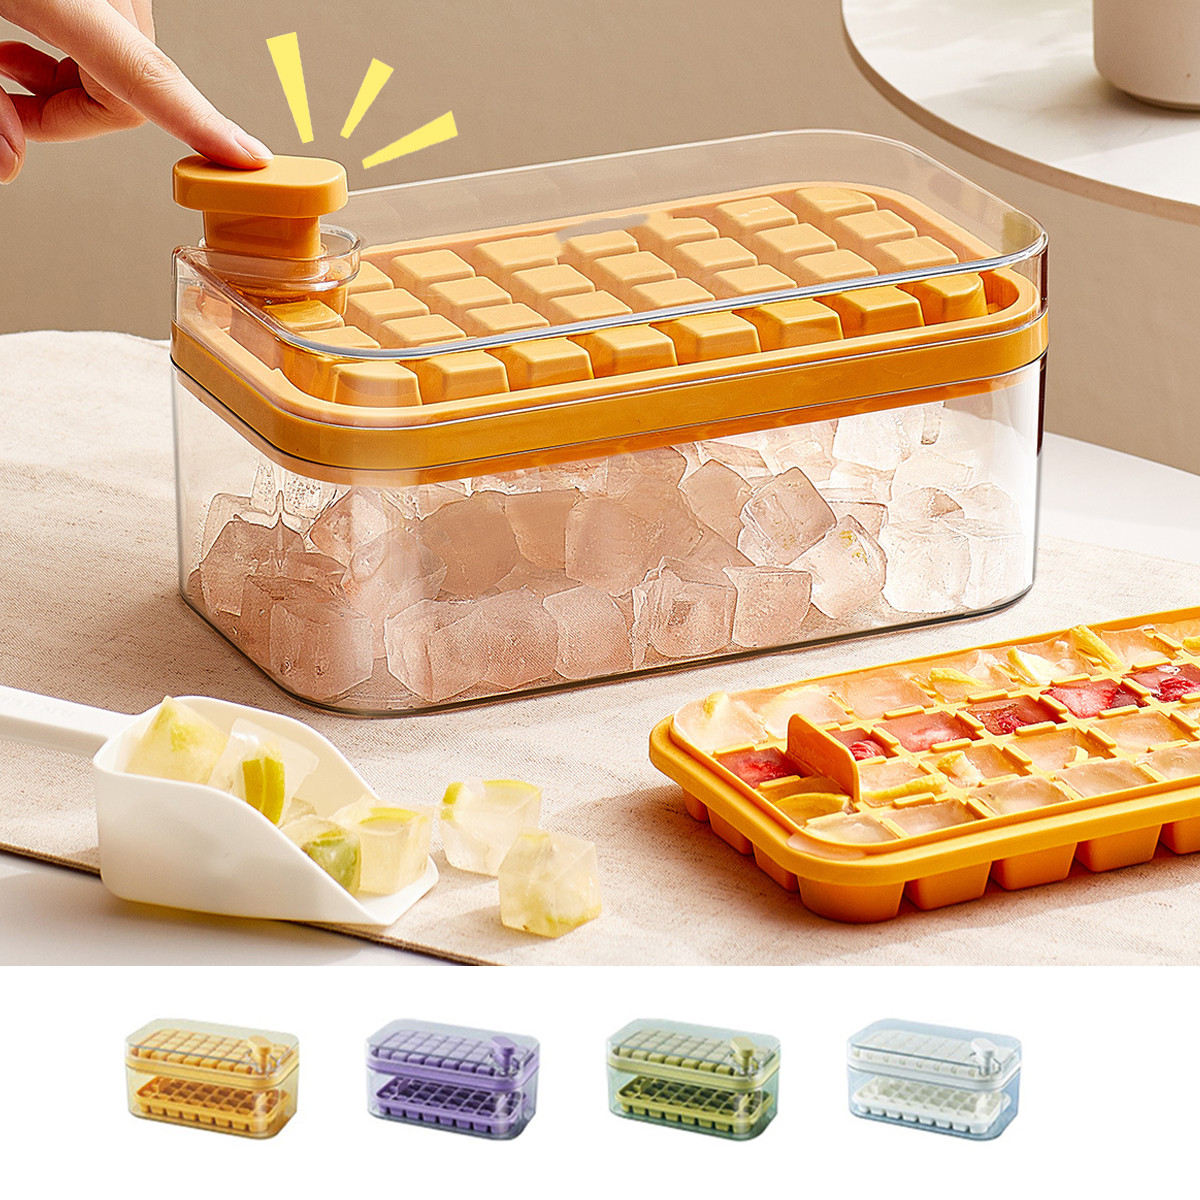 Luxury Style Ice Cube Tray With Lid, Silicone Ice Mold For